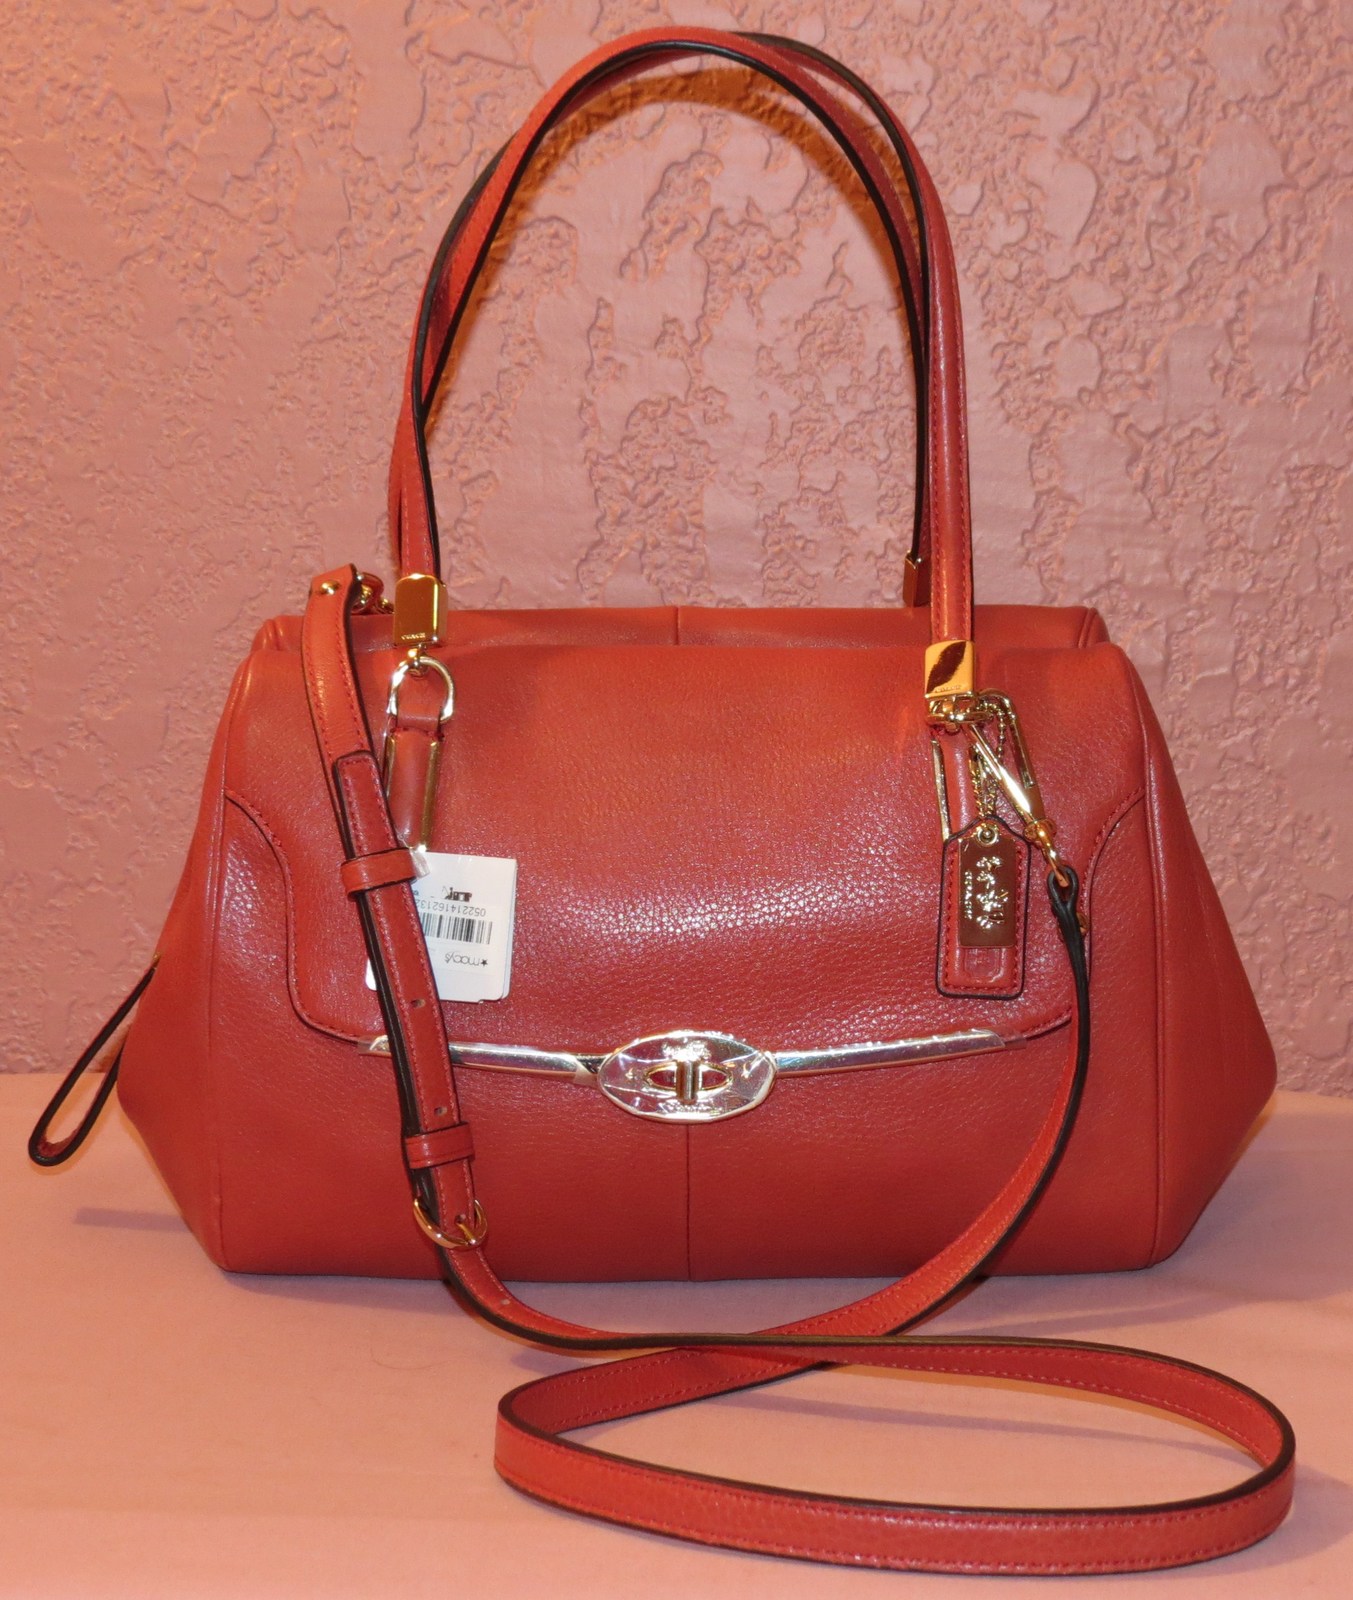 NWT Coach Madison East-West Madeline Satchel in Vermillion Leather